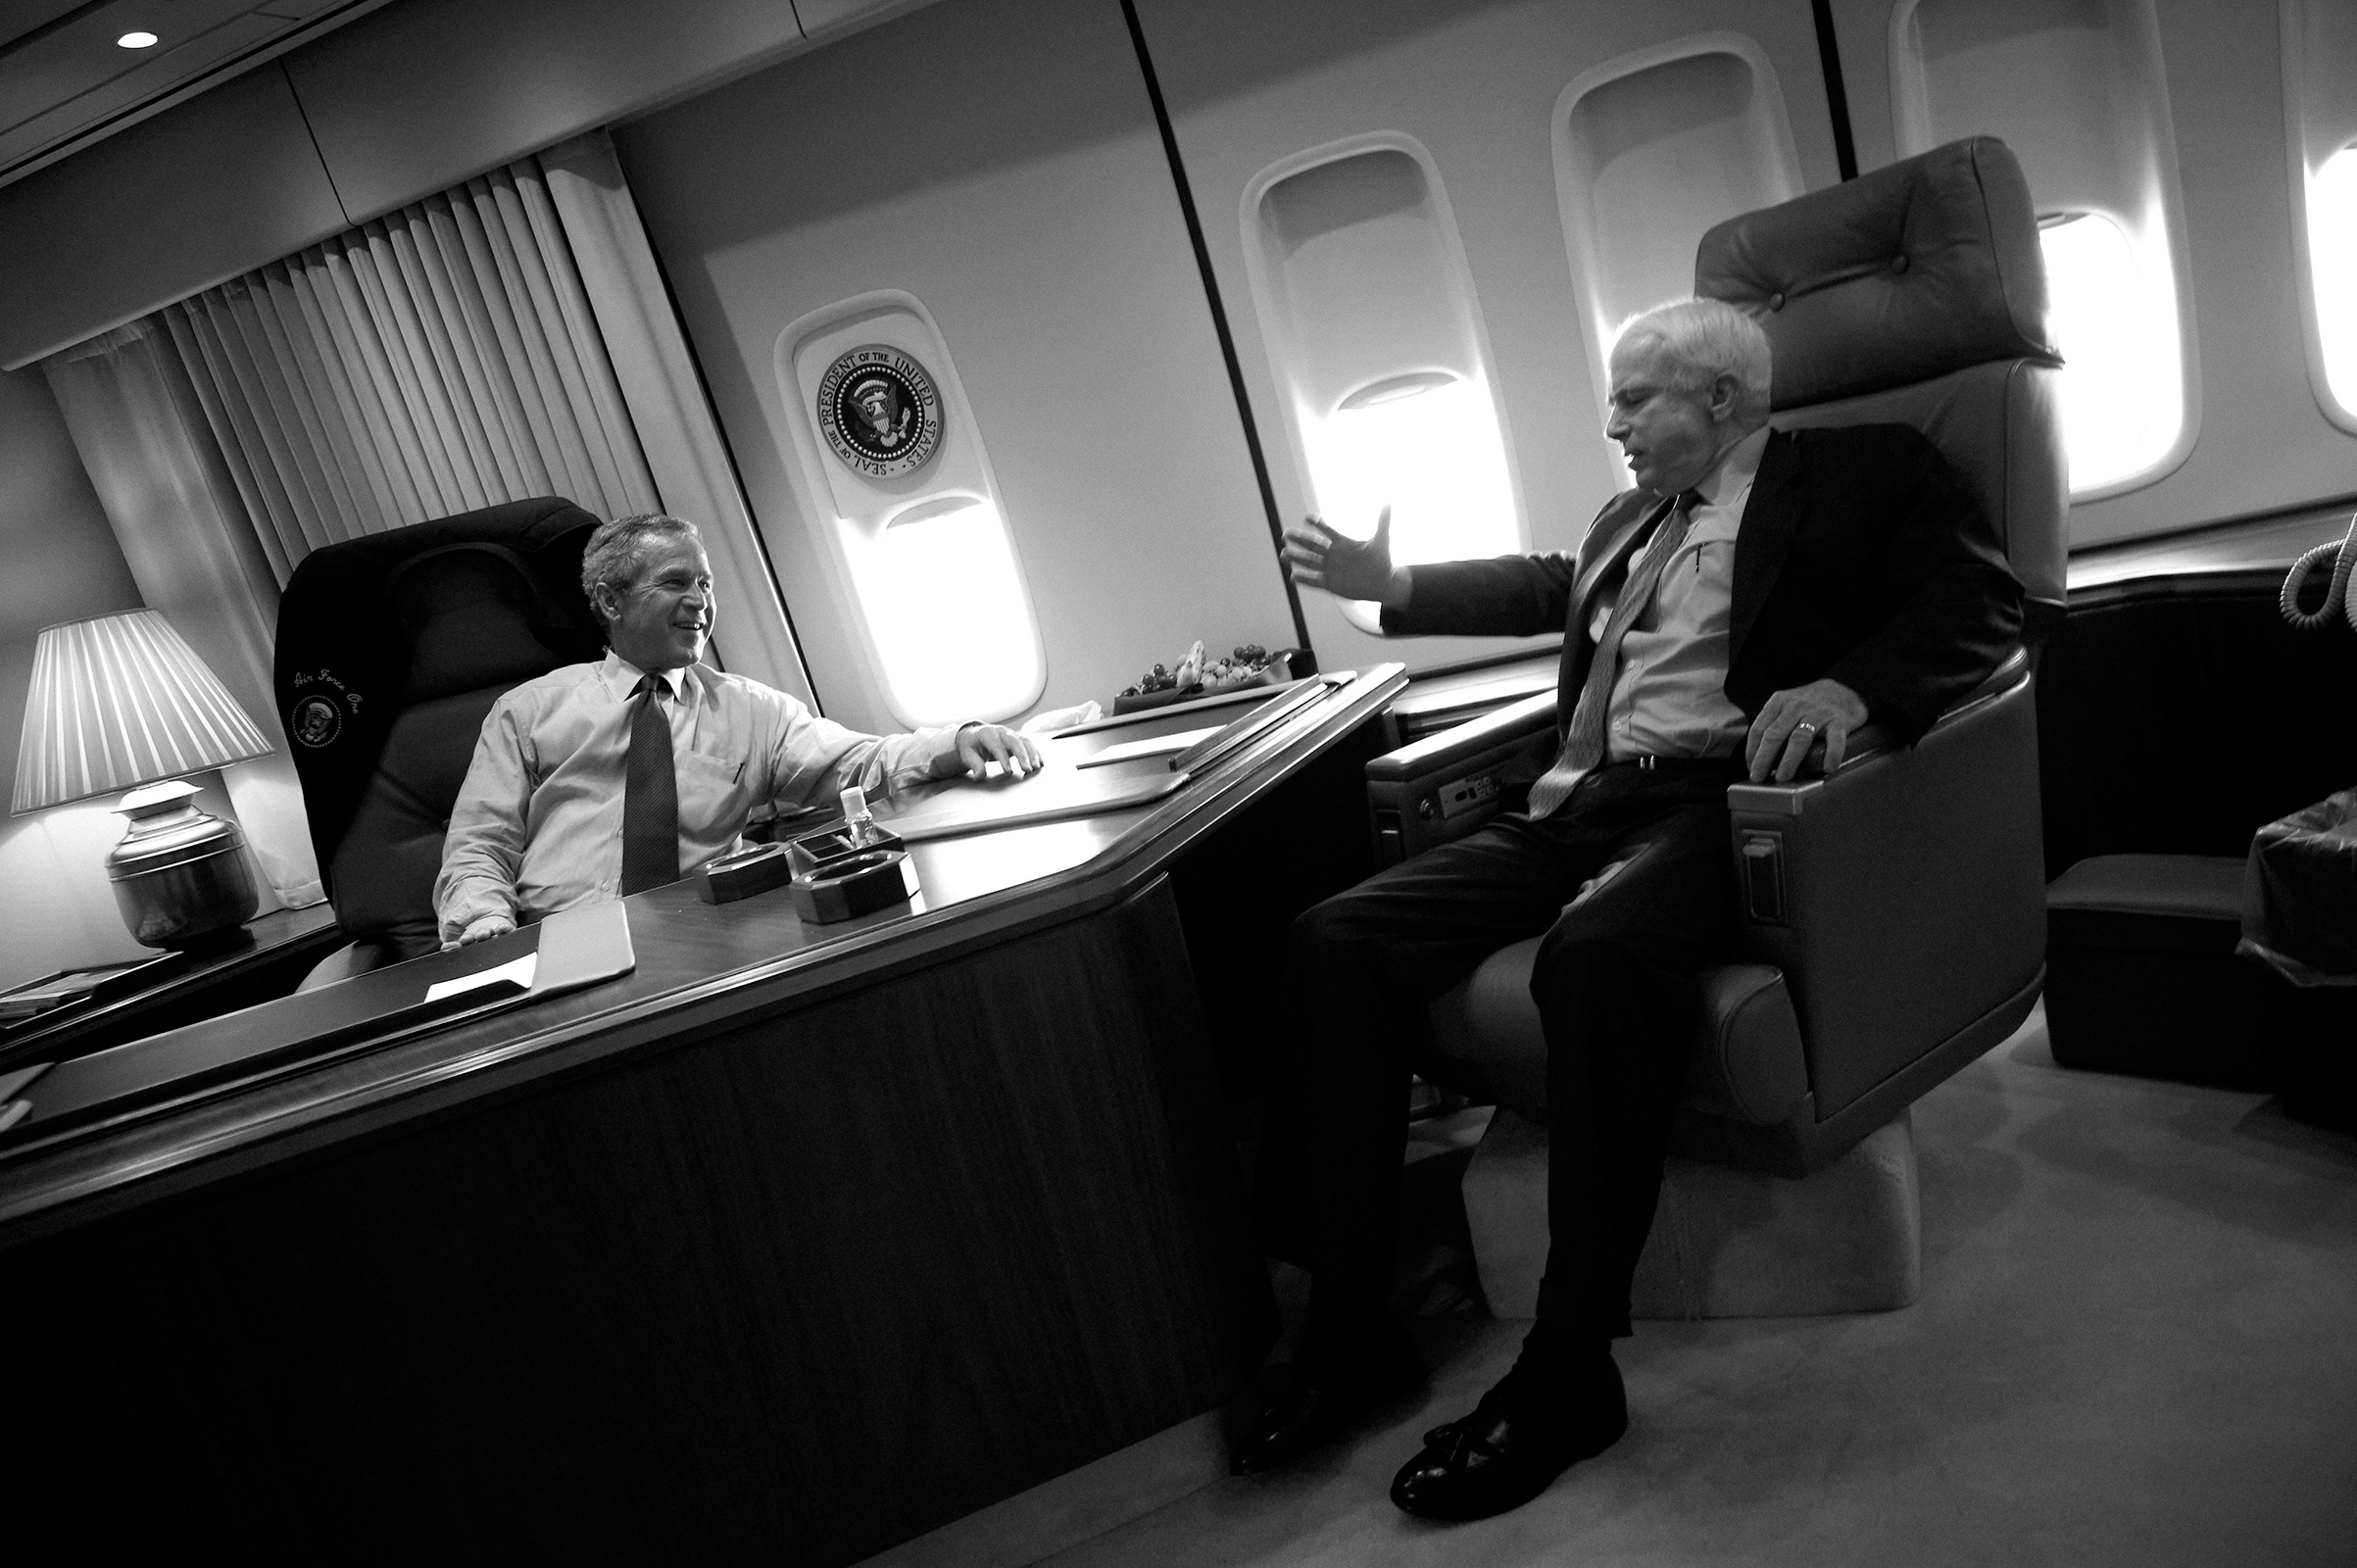 President George W. Bush with Sen. John McCain on board Air Force One on August 11, 2004. (Christopher Morris—VII for TIME)